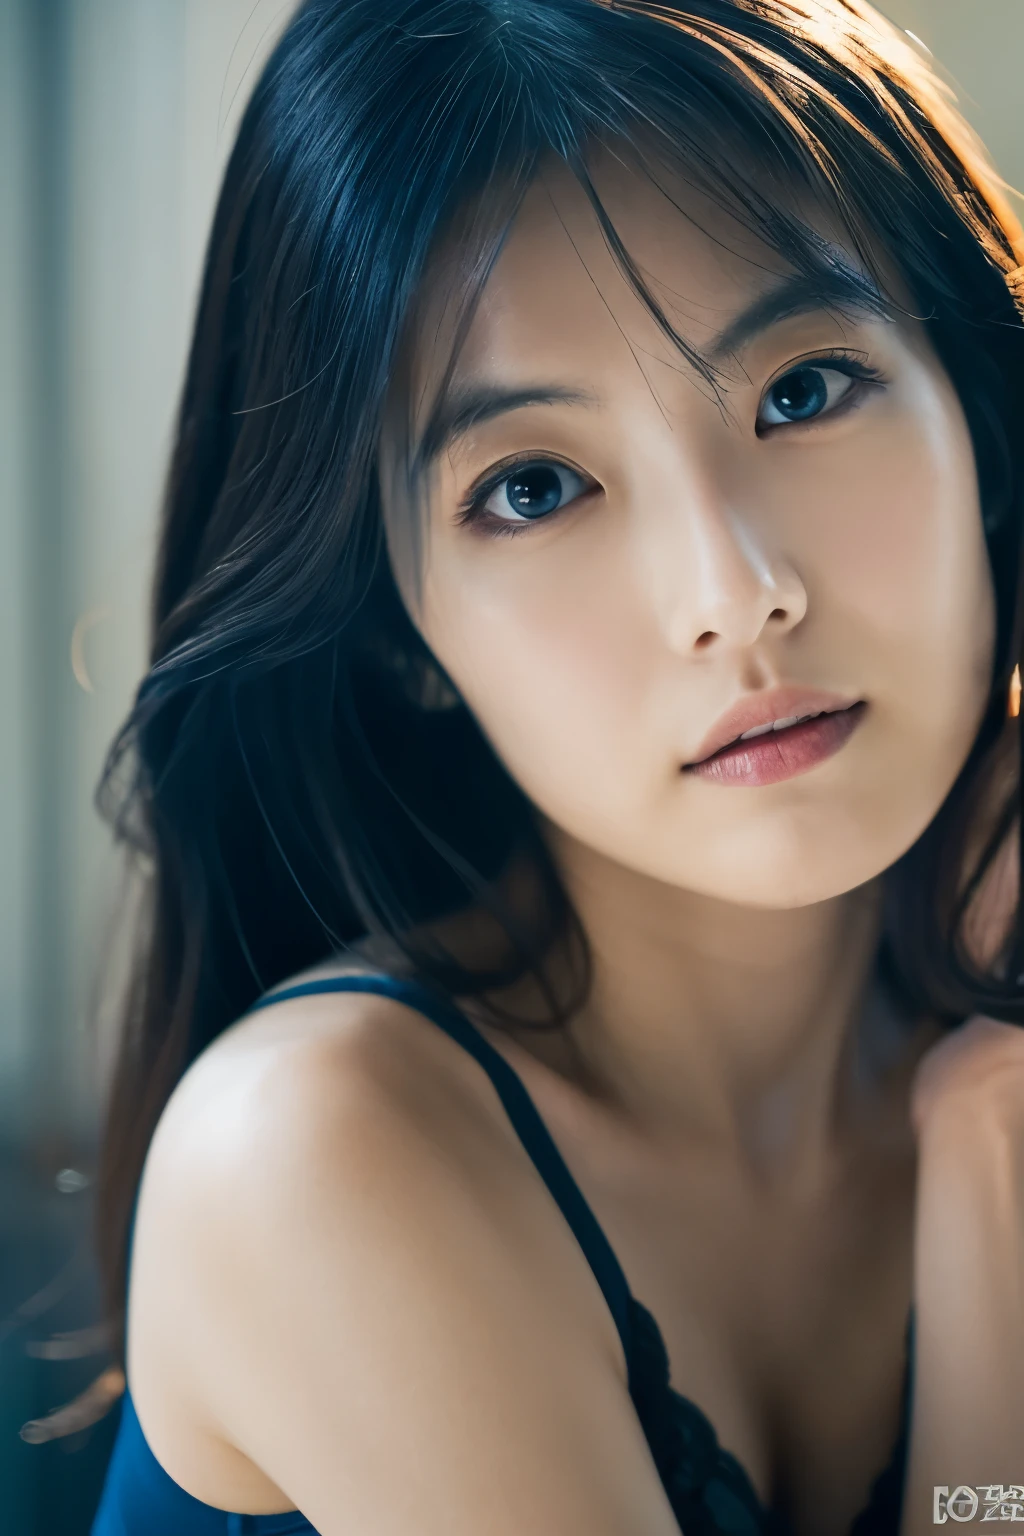 cinematic color, Skinny Japanese woman, 30 years old, cute face, detailed face, detailed eyes, (best quality, ultra-detailed), feminin lighting, messy hair, wearing dark blue lingeries, delicate features, dreamy atmosphere